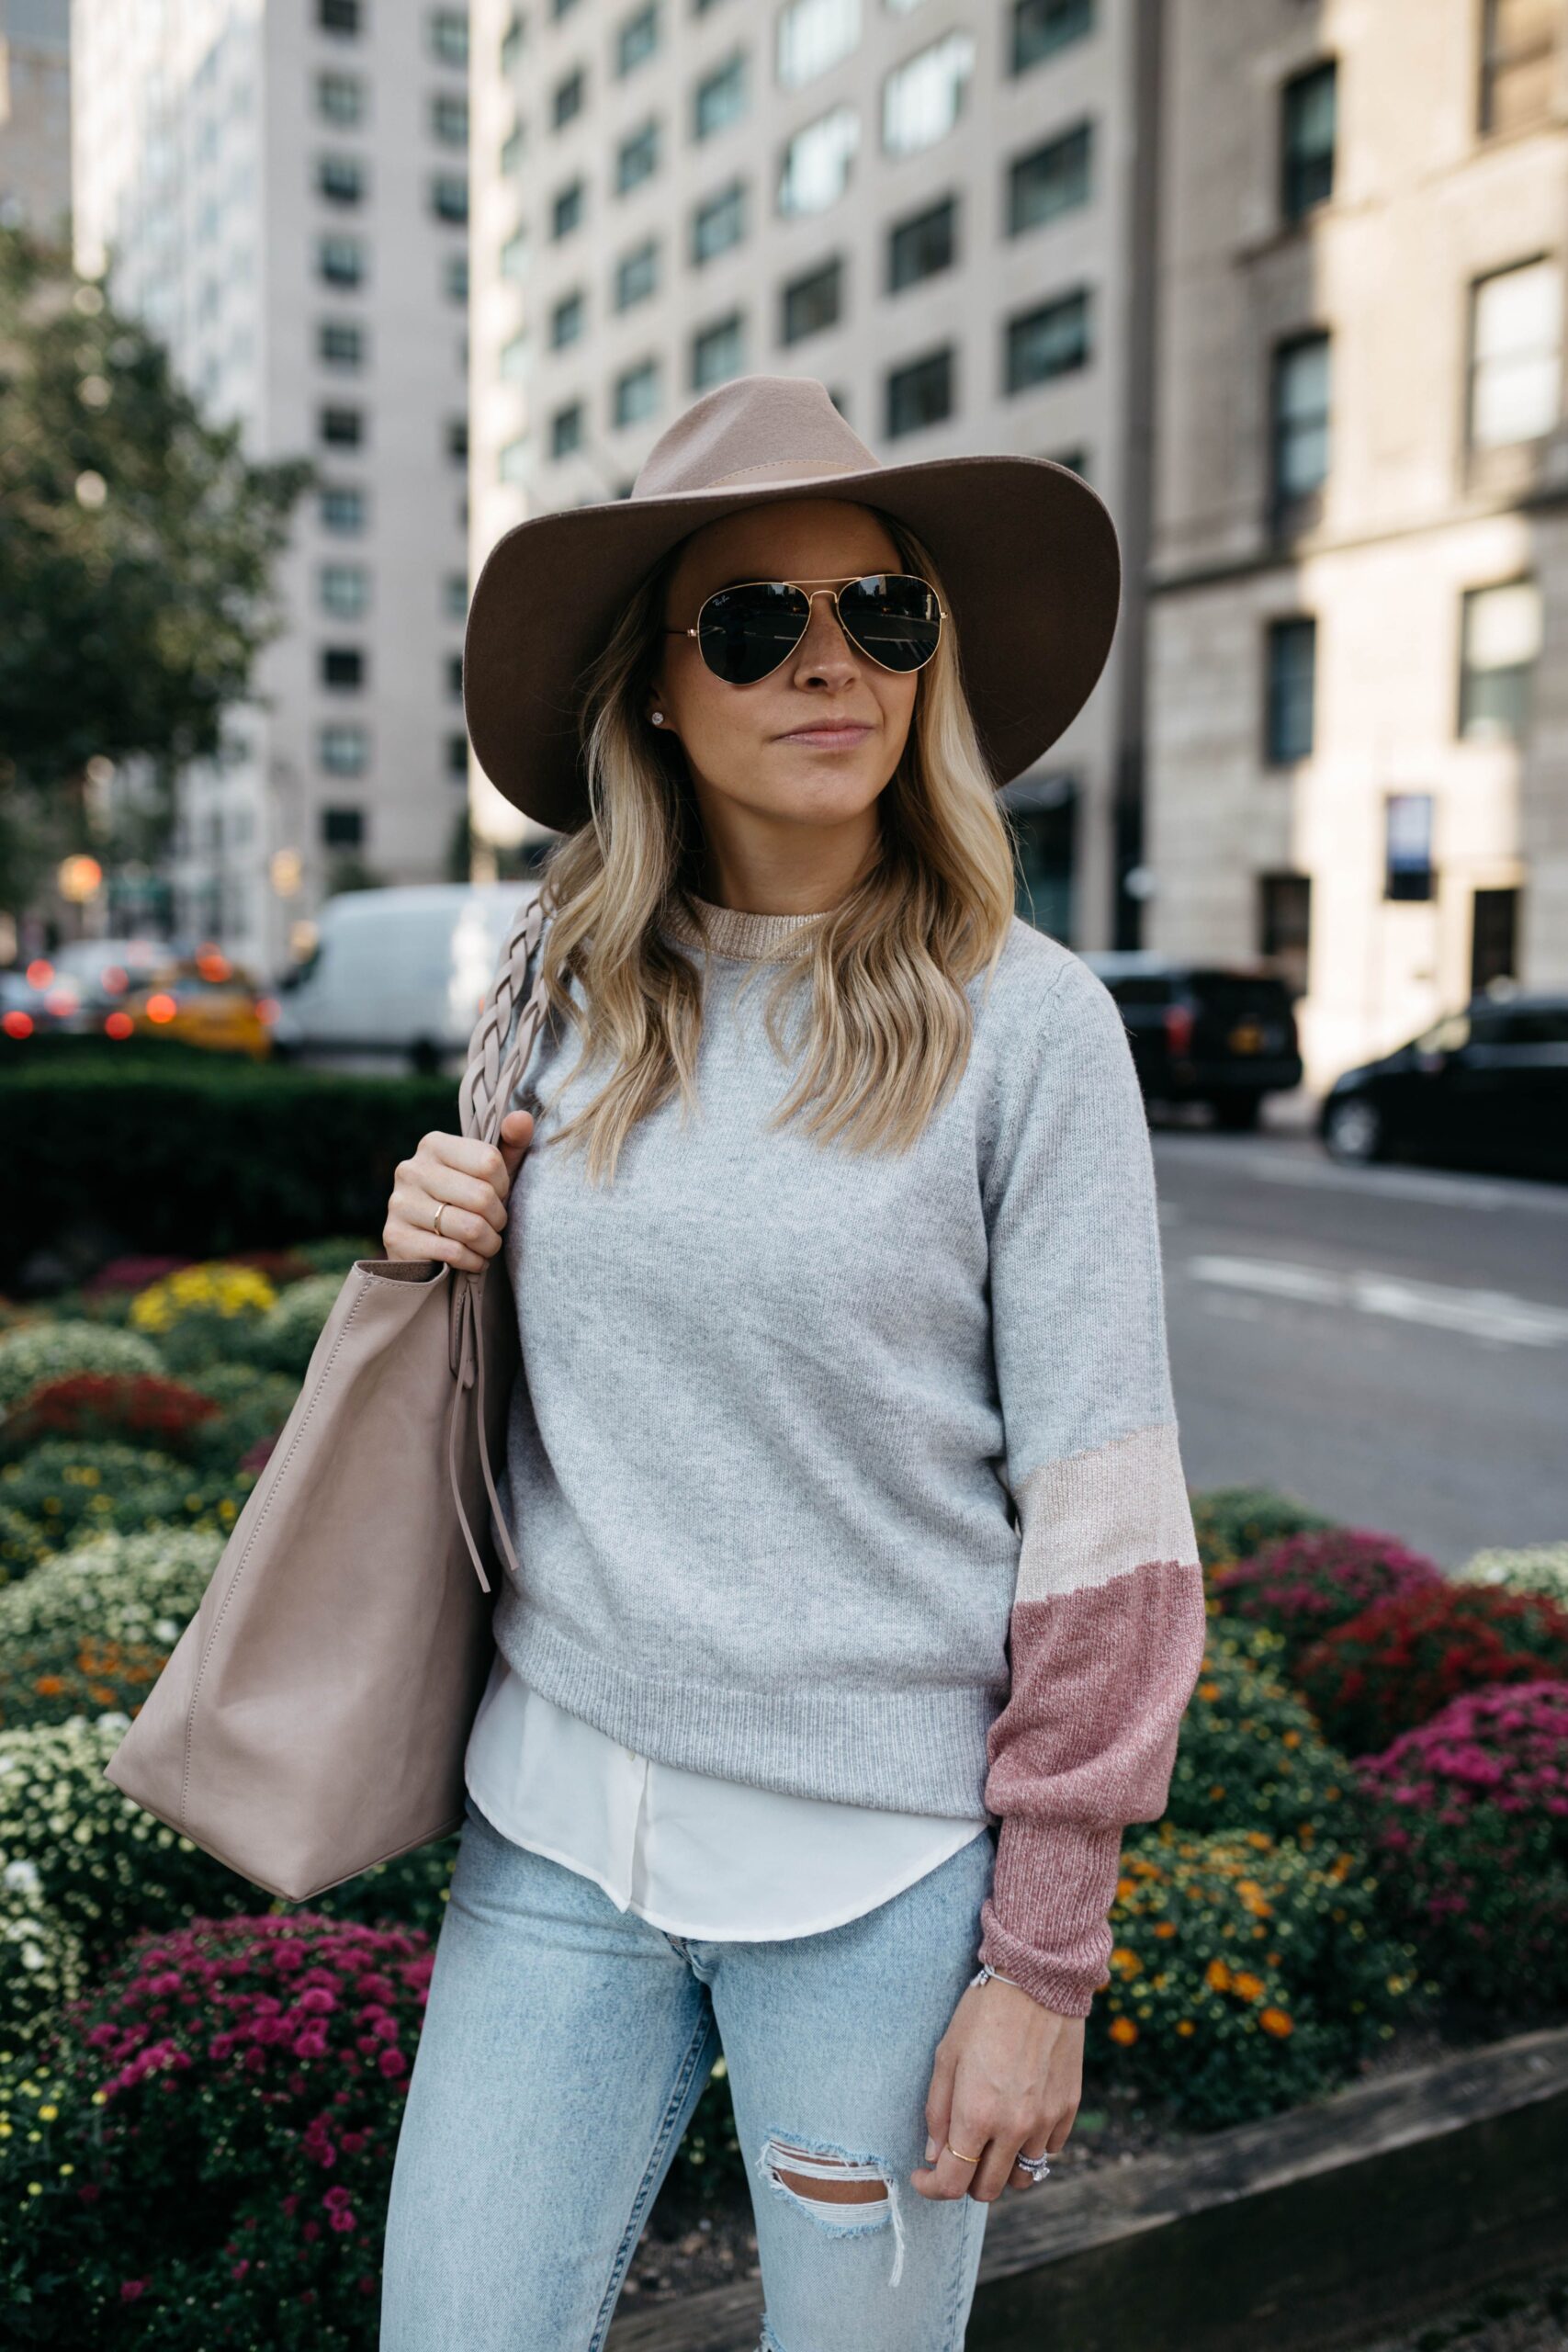 Fall Outfits With Wide Brim
  Hats